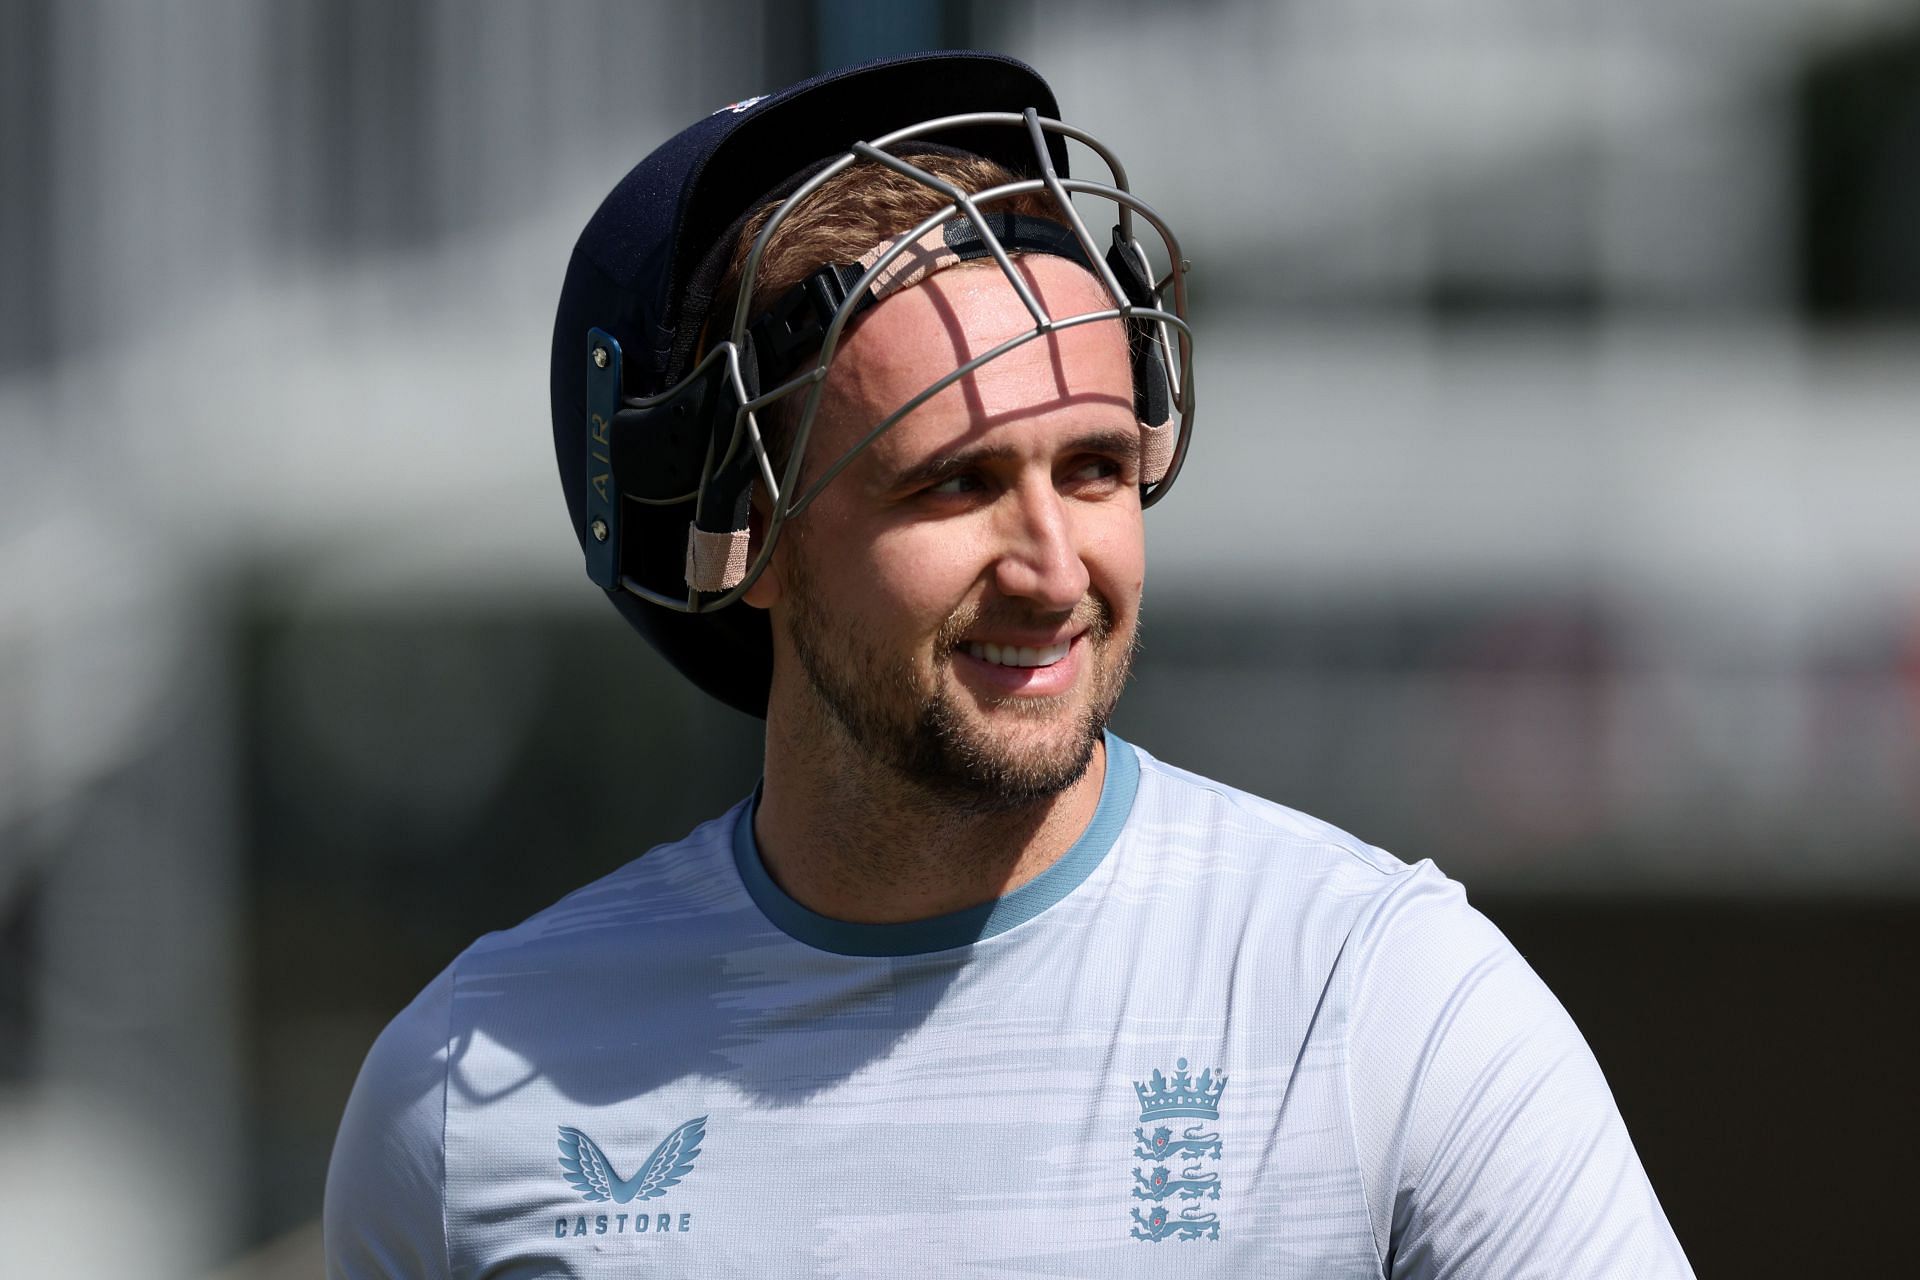 ENG vs IND 2022: Liam Livingstone is one of the most destructive batters. (Image Credits: Getty)